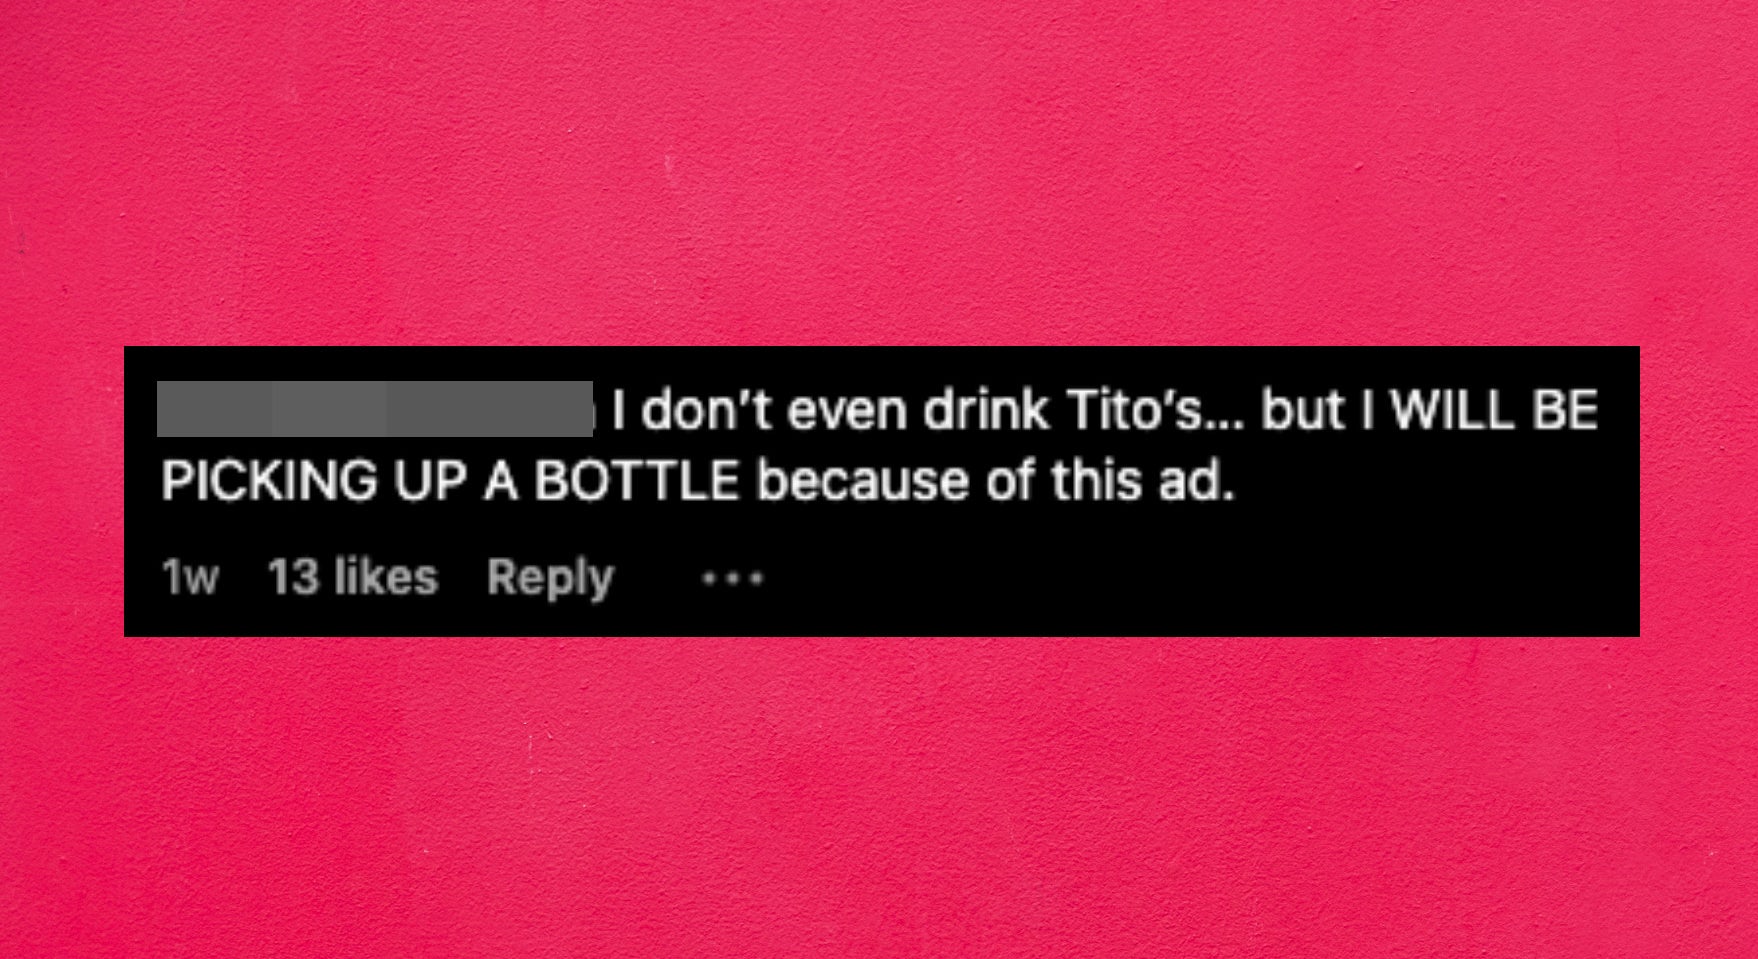 instagram comment: i don&#x27;t even drink tito&#x27;s, but i will be picking up a bottle because of this ad.